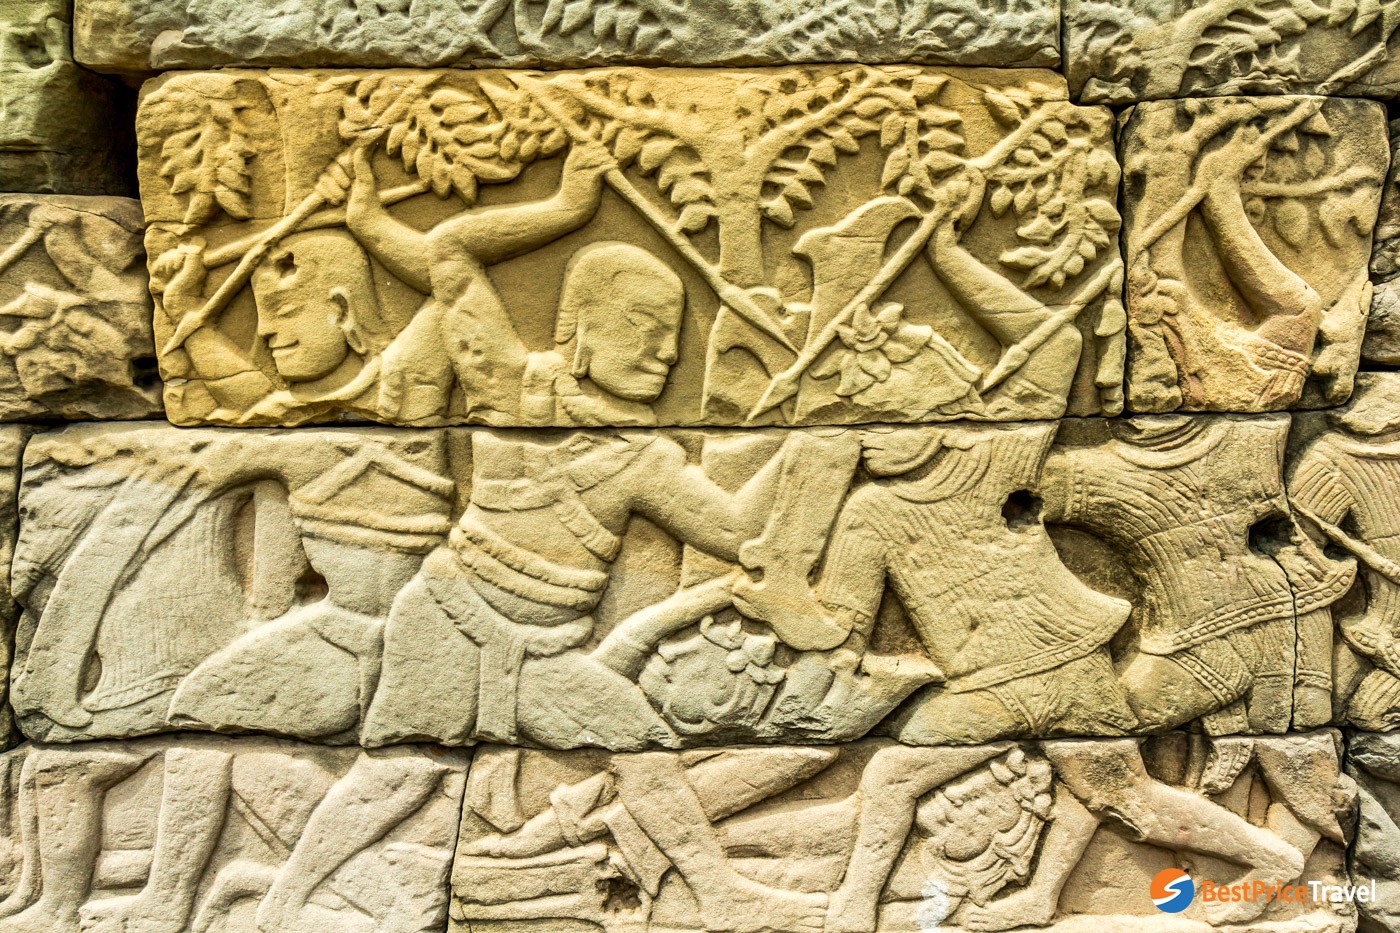 Remarkable bas reliefs, Khmers on the left, fighting Chams on the right